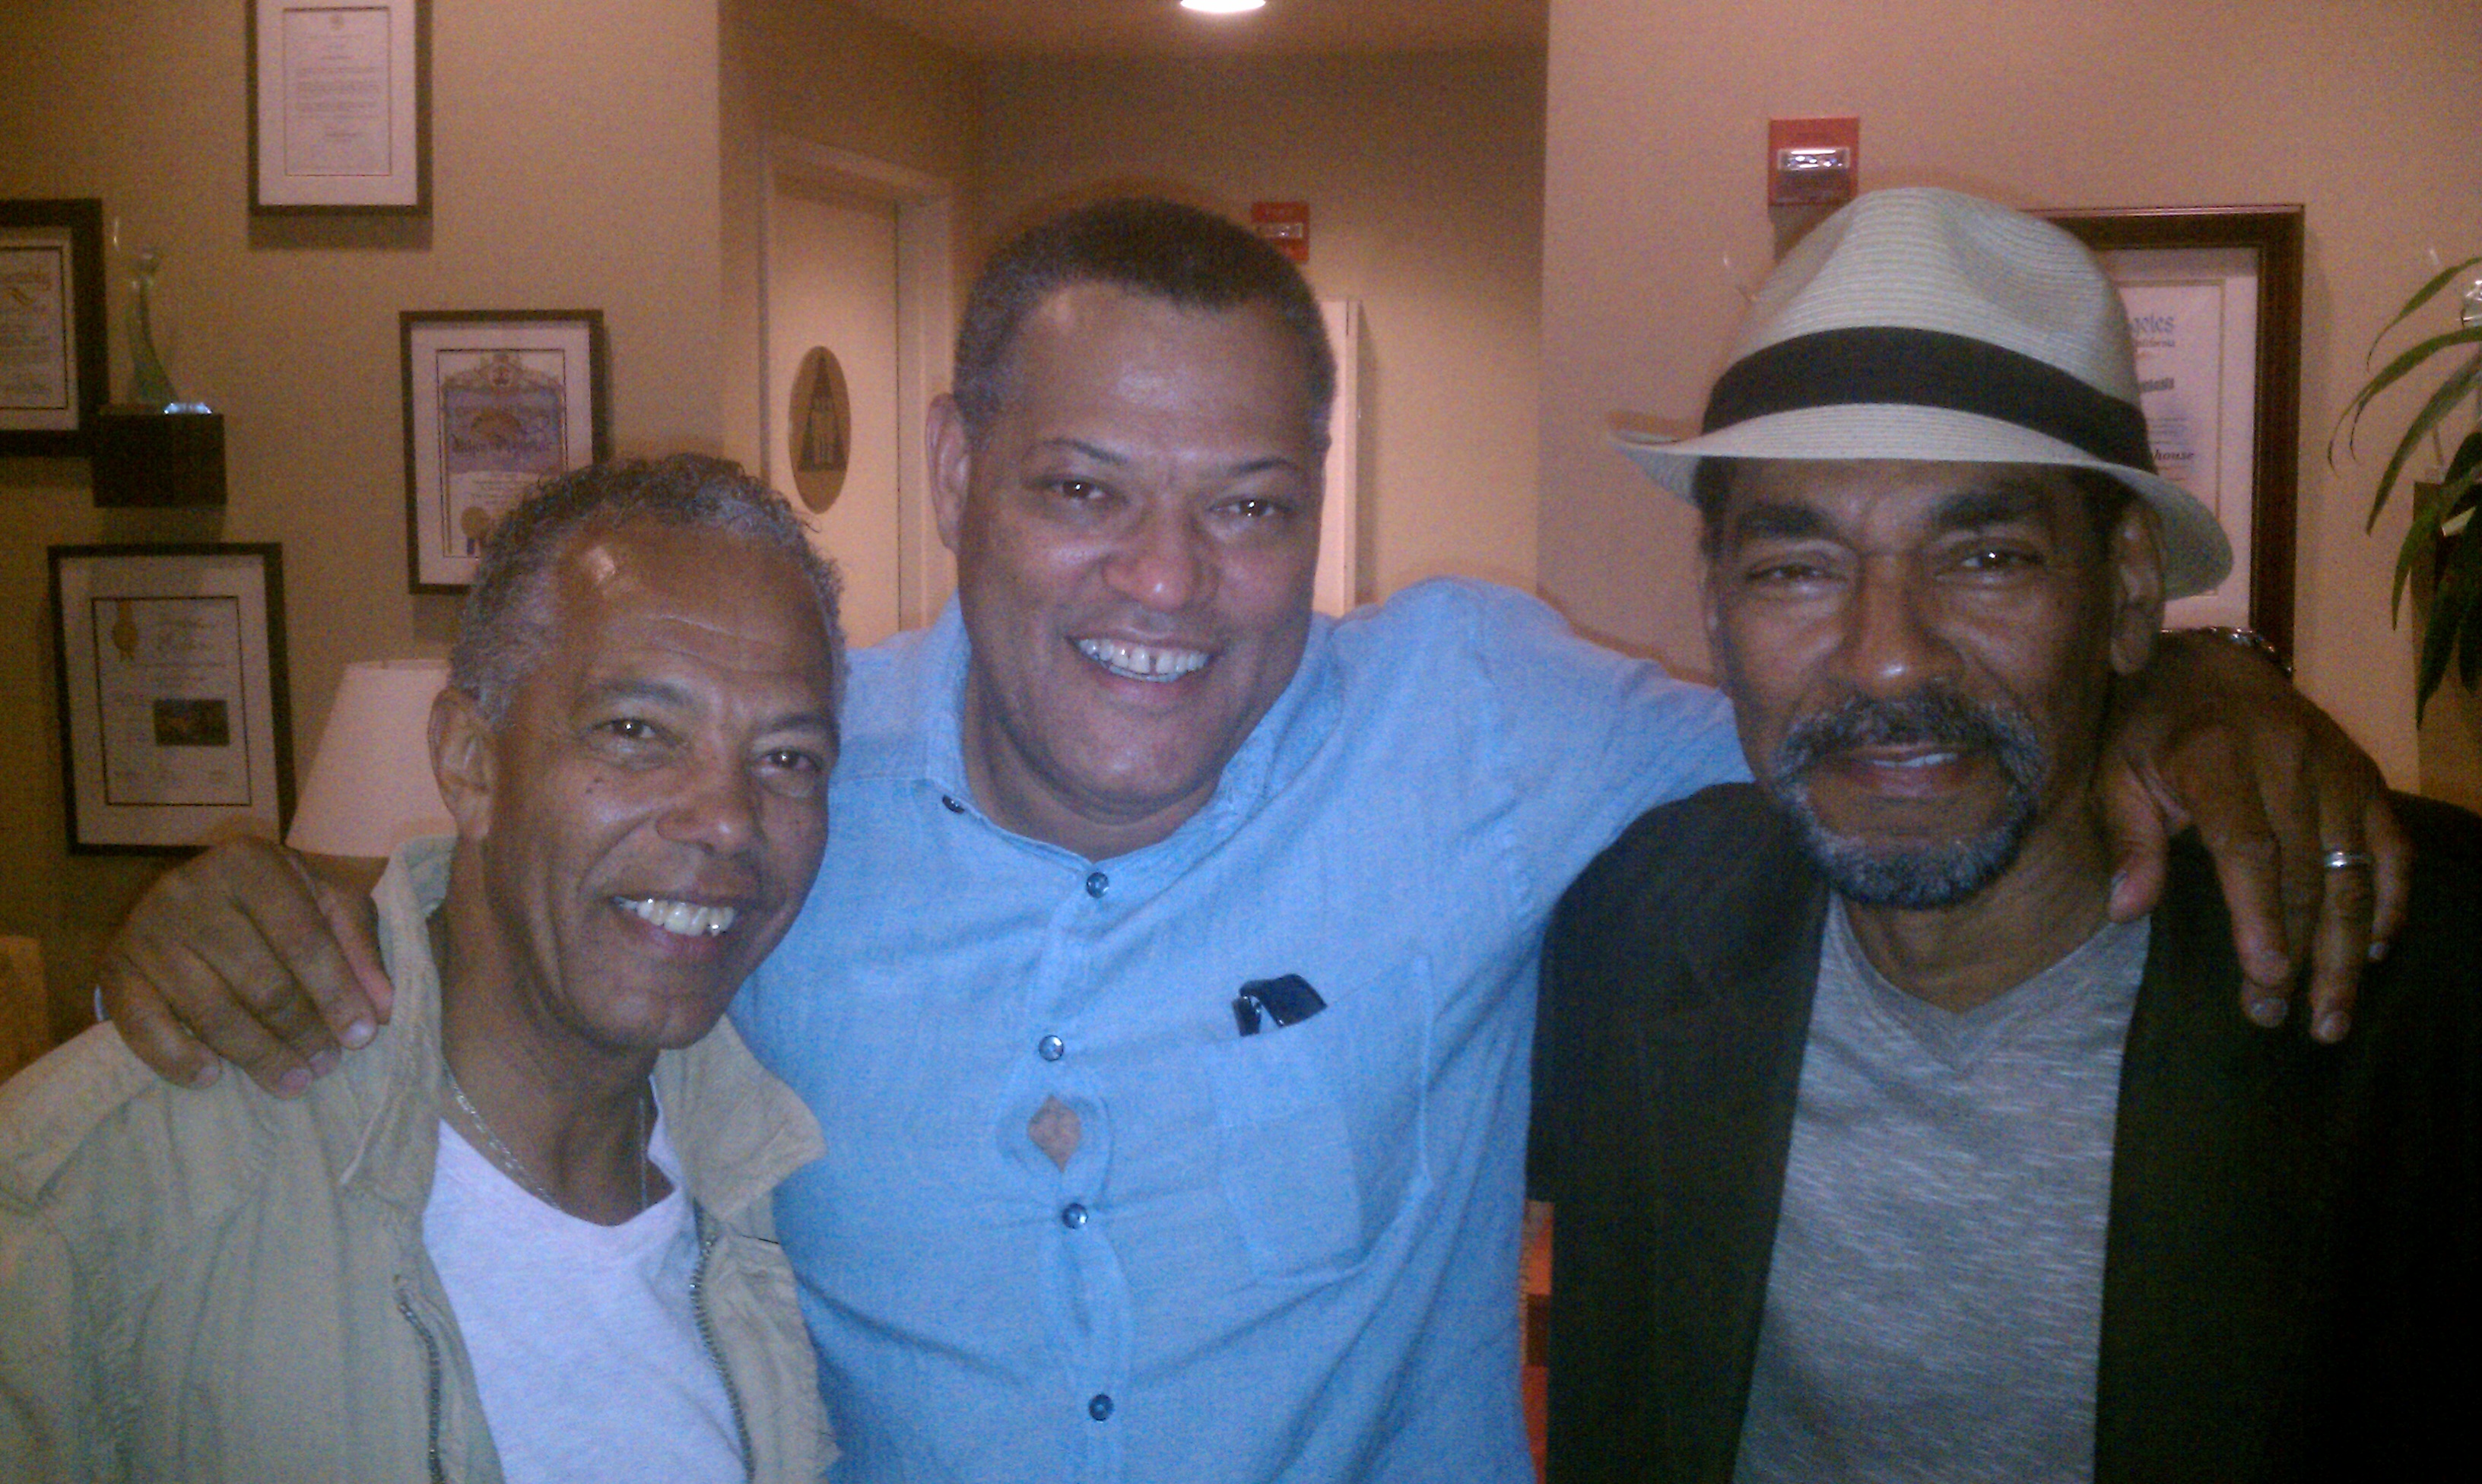 Haskell Vaughn Anderson III, Laurence Fishburne and Terry Alexander at 'Thurgood Marshall'